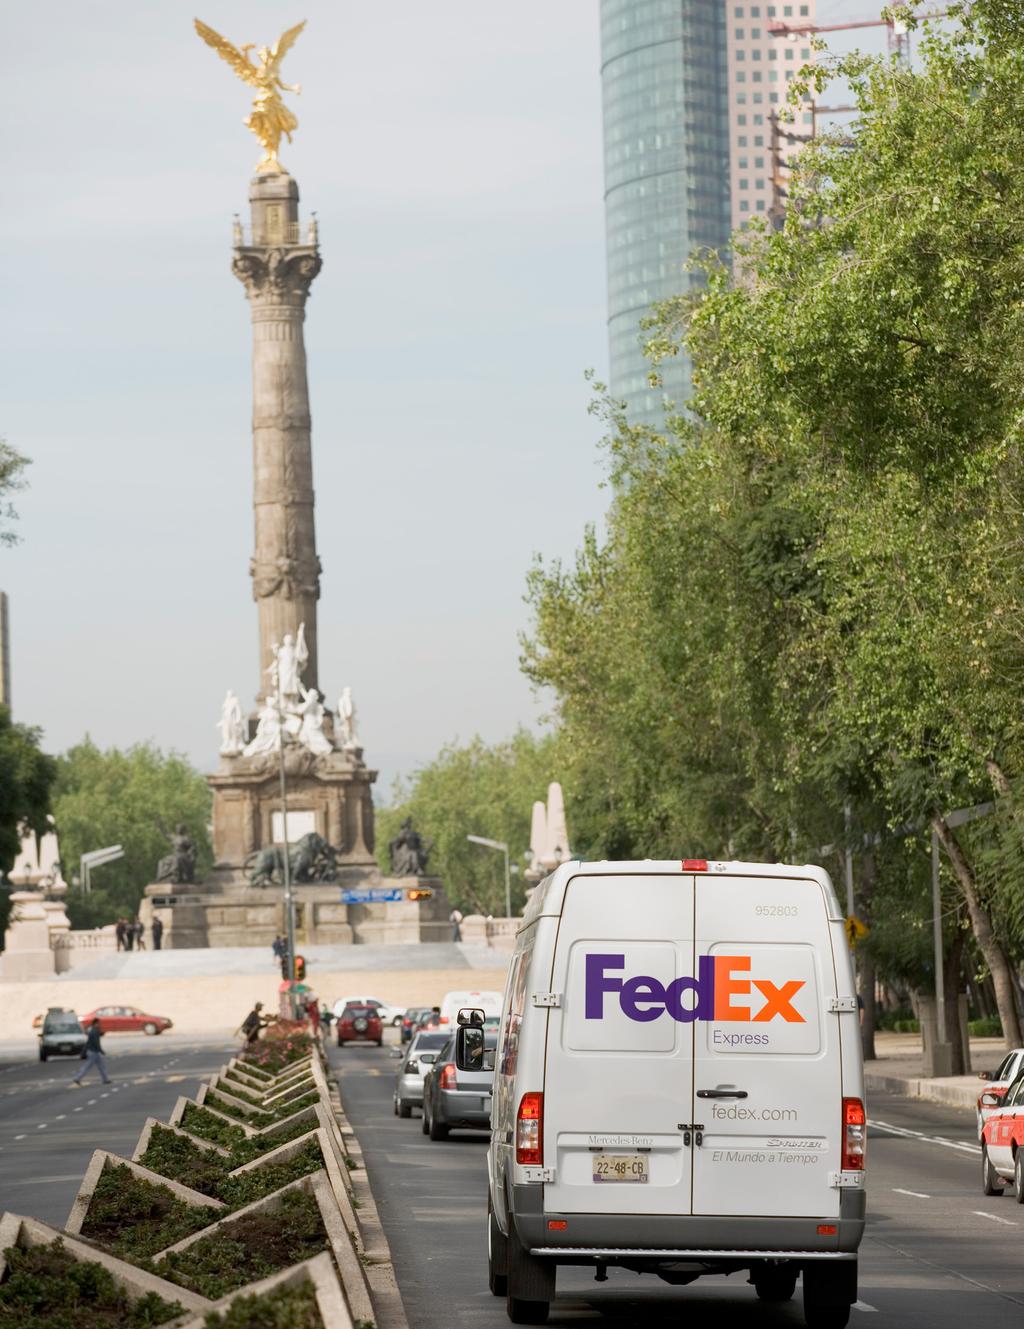 National Services For more information on FedEx services